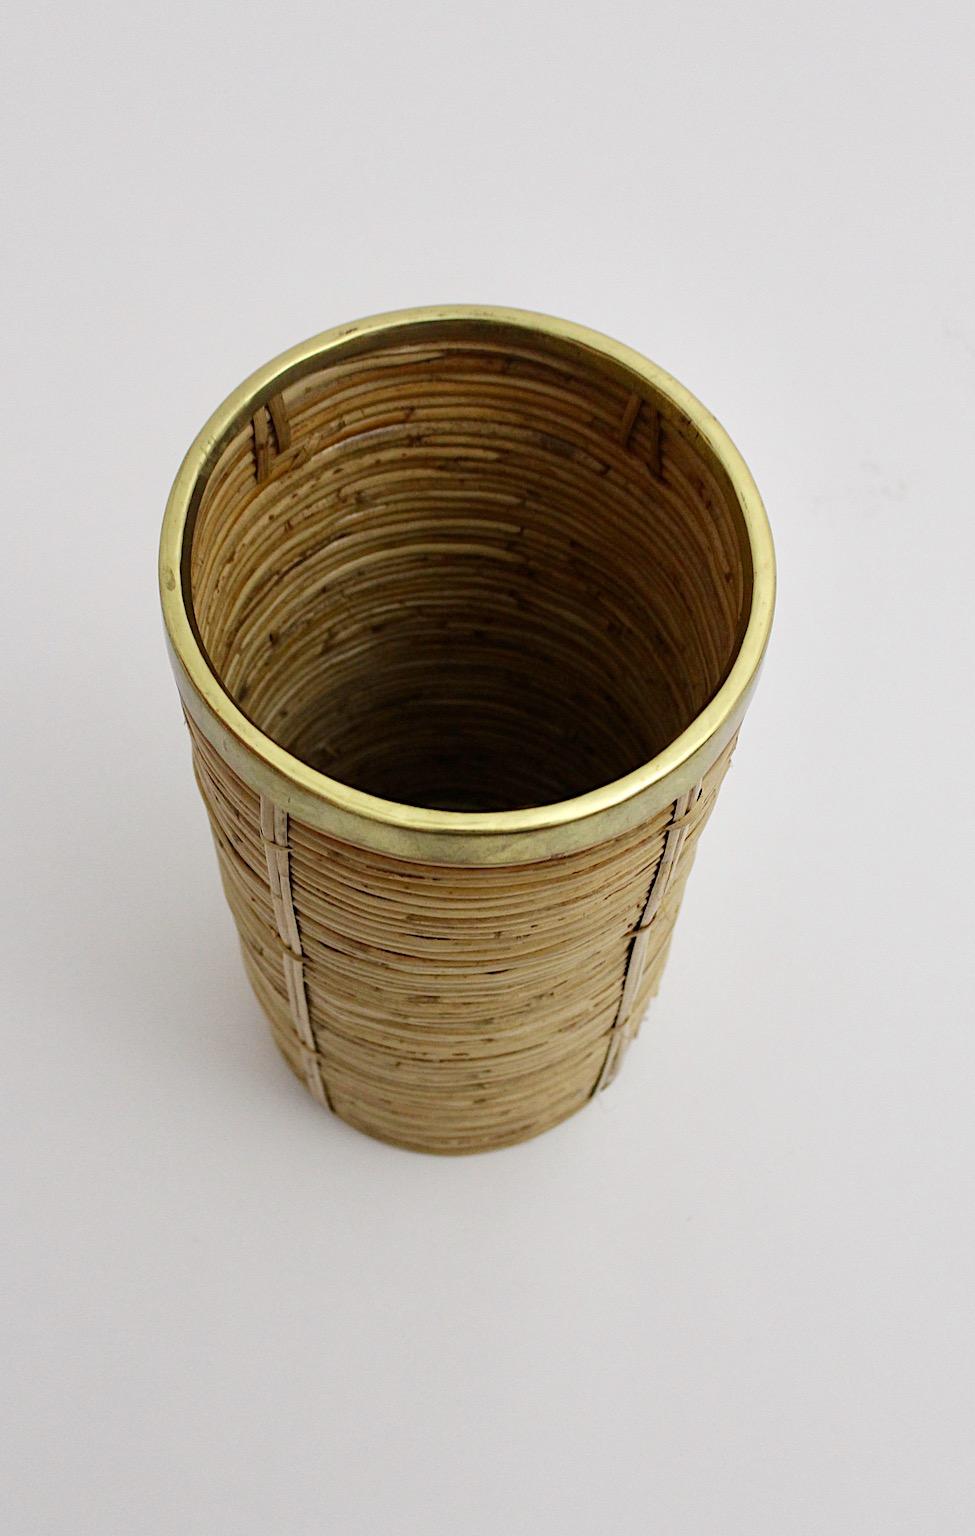 Riviera Style Organic Rattan Brass Paper Basket or Cane Holder, 1970s, Italy For Sale 1